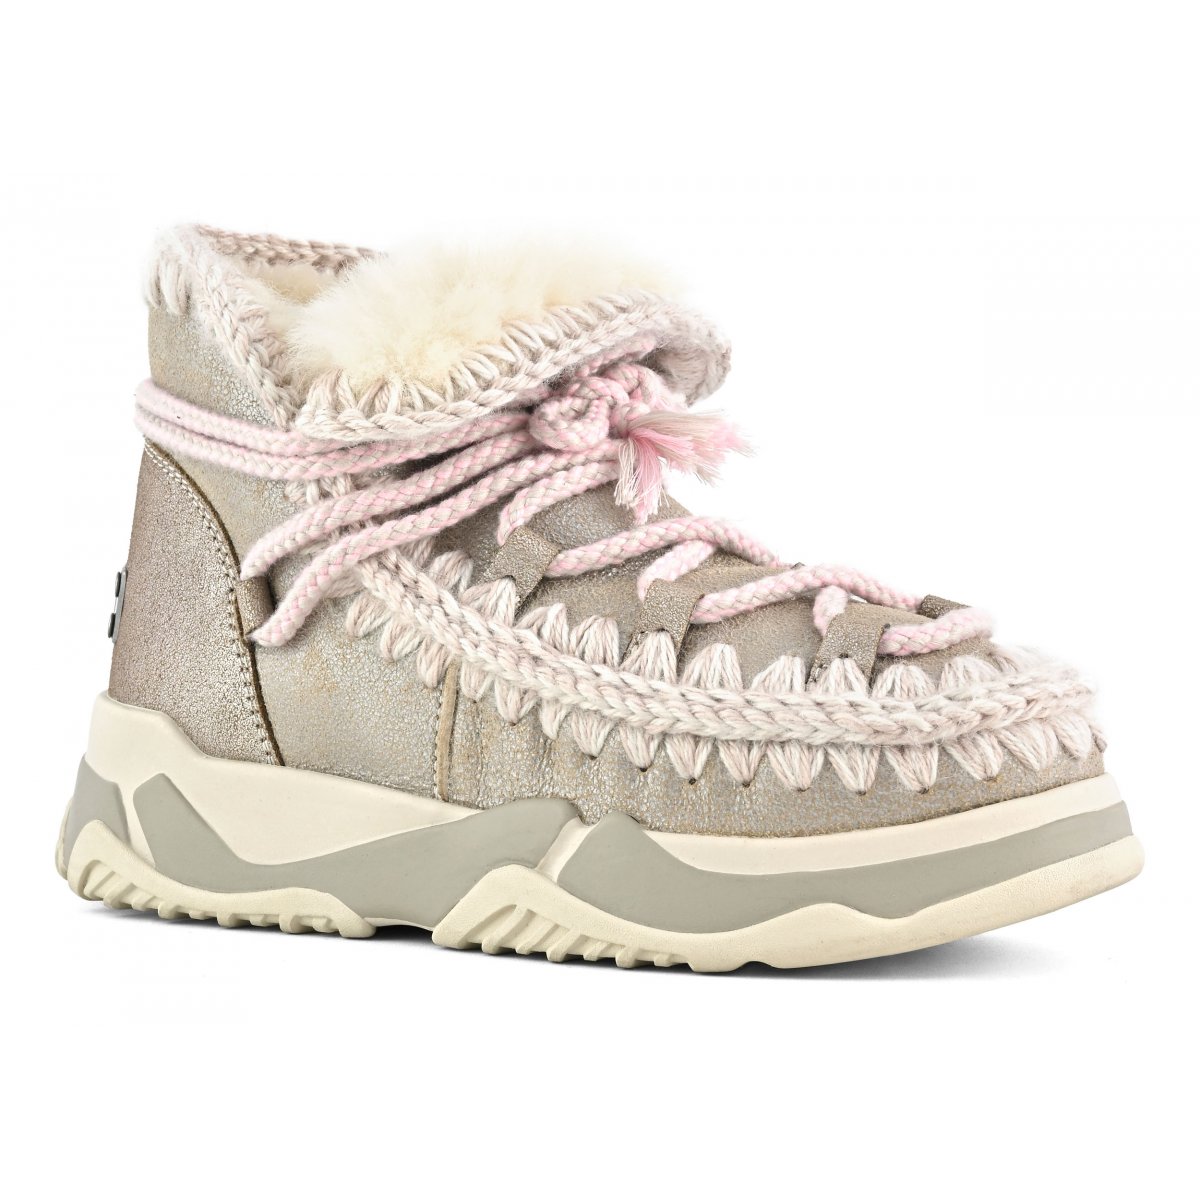 Scoubidou lace trainer STME img 2